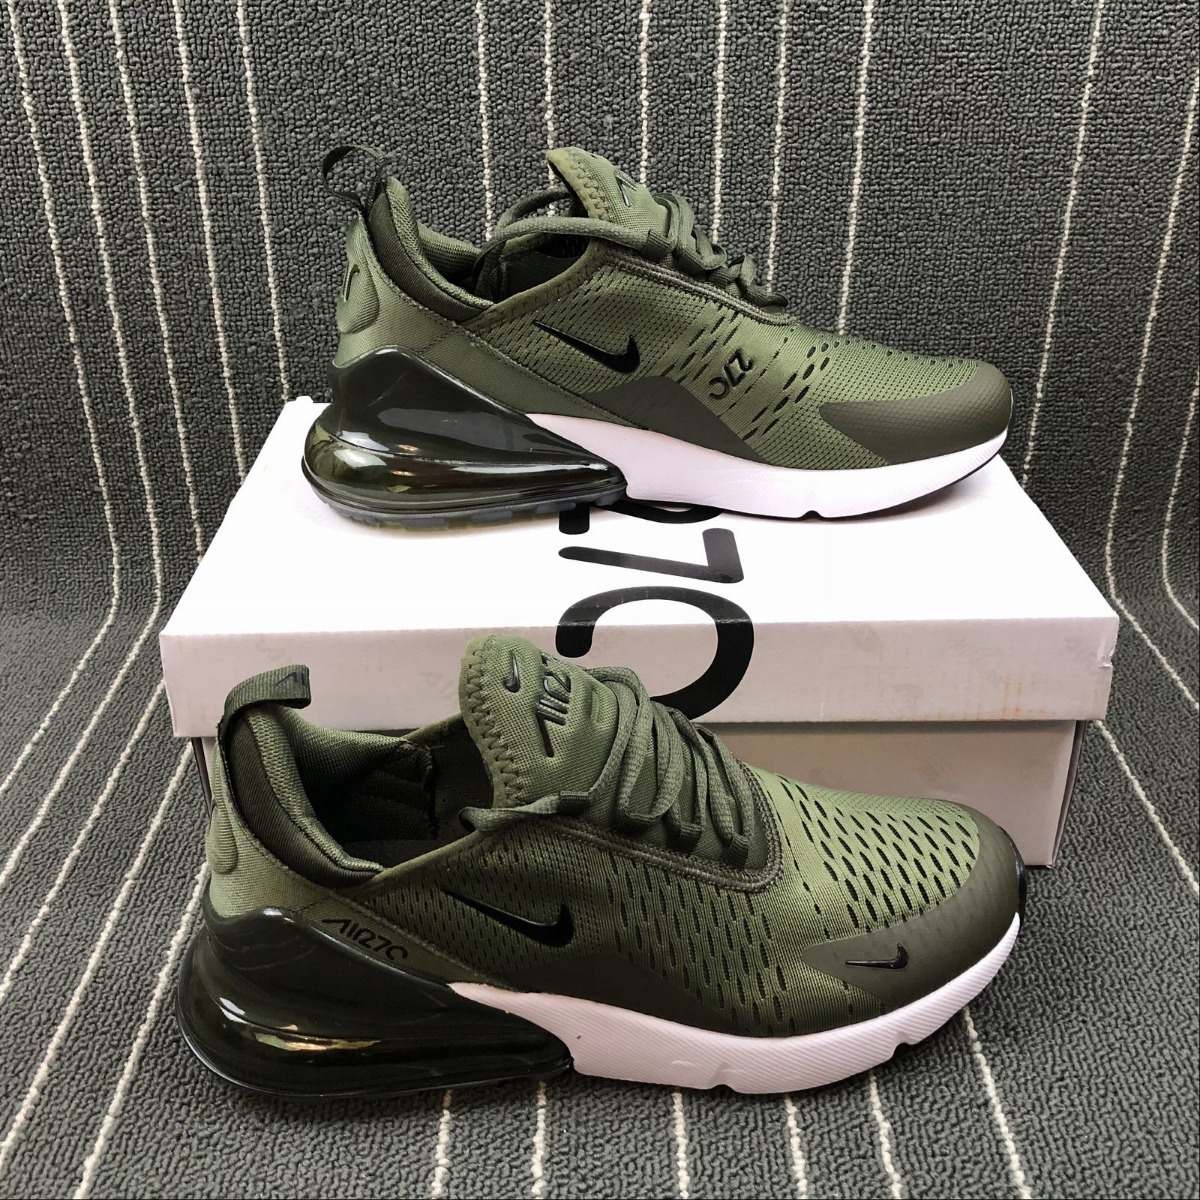 Zapatillas Nike Air Max 270 Army Green 40-45 Exclusive Line - S/ 350,00 ...